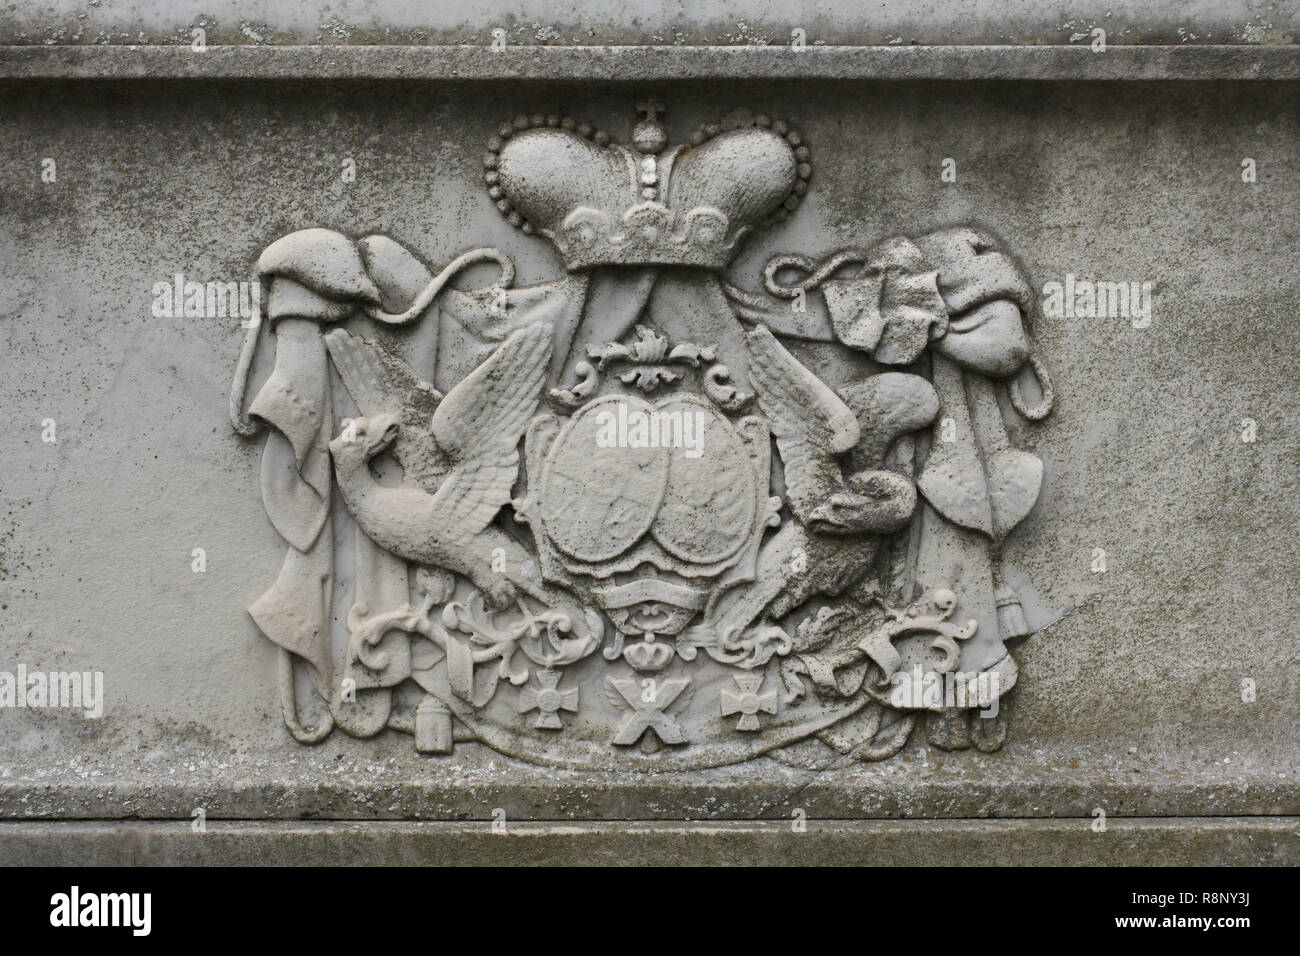 Coat of arms of the Bagration Family depicted on the marble tombstone of Russian princess Catherine Bagration (1783-1857) at the Greek Orthodox cemetery on San Michele Island (Cimitero di San Michele) in Venice, Italy. Russian noblewoman Catherine Bagration, née Skavronskaya, was a wife of Russian general and prince of Georgian origin Pyotr Bagration, prominent during the Napoleonic Wars. Stock Photo